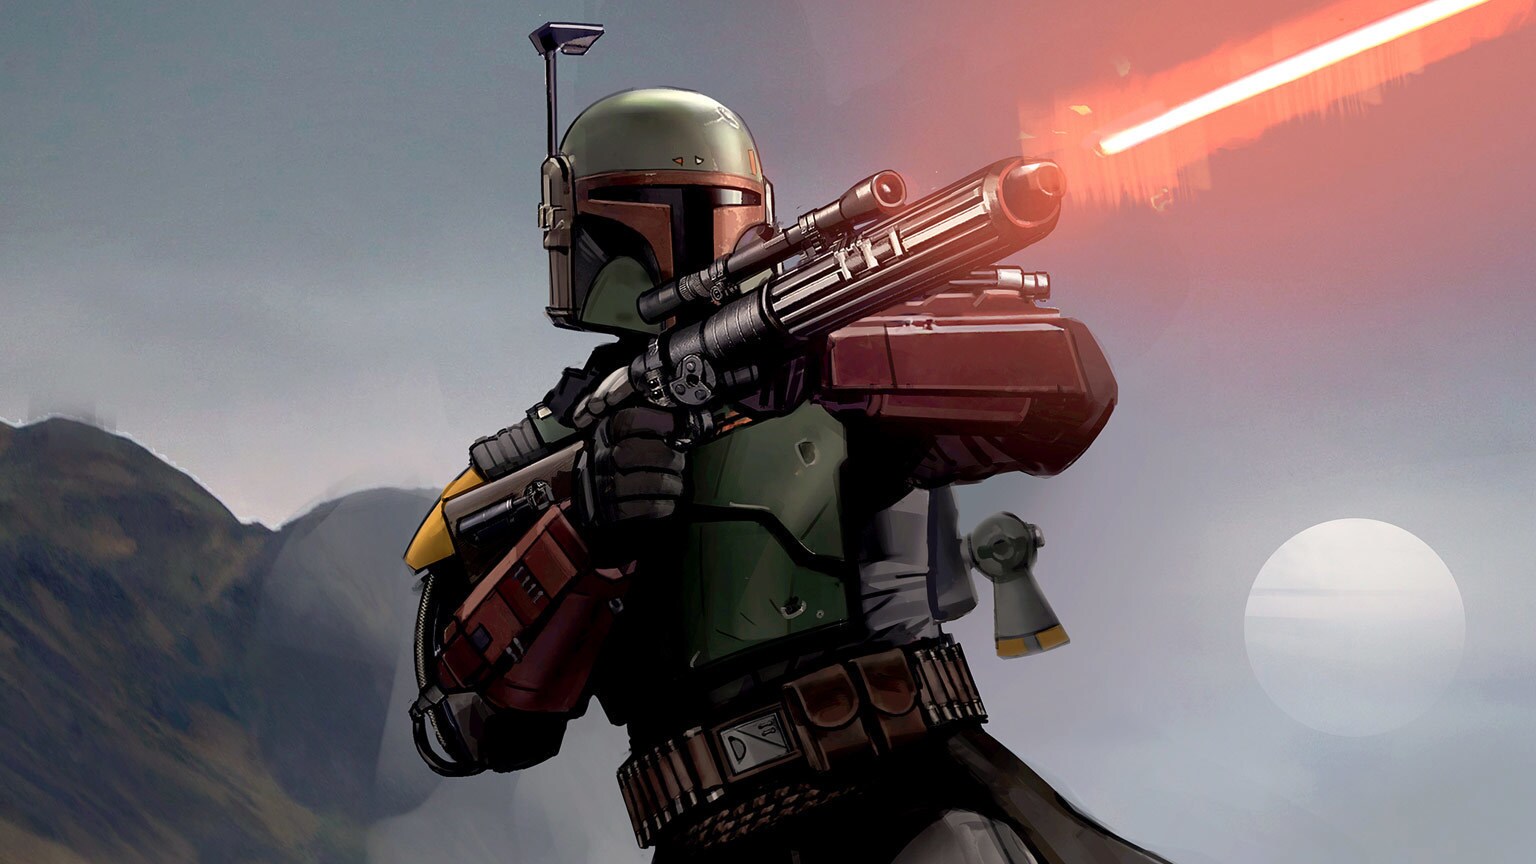 The Book of Boba Fett Cargo Hold: “Chapter 7: In the Name of Honor”